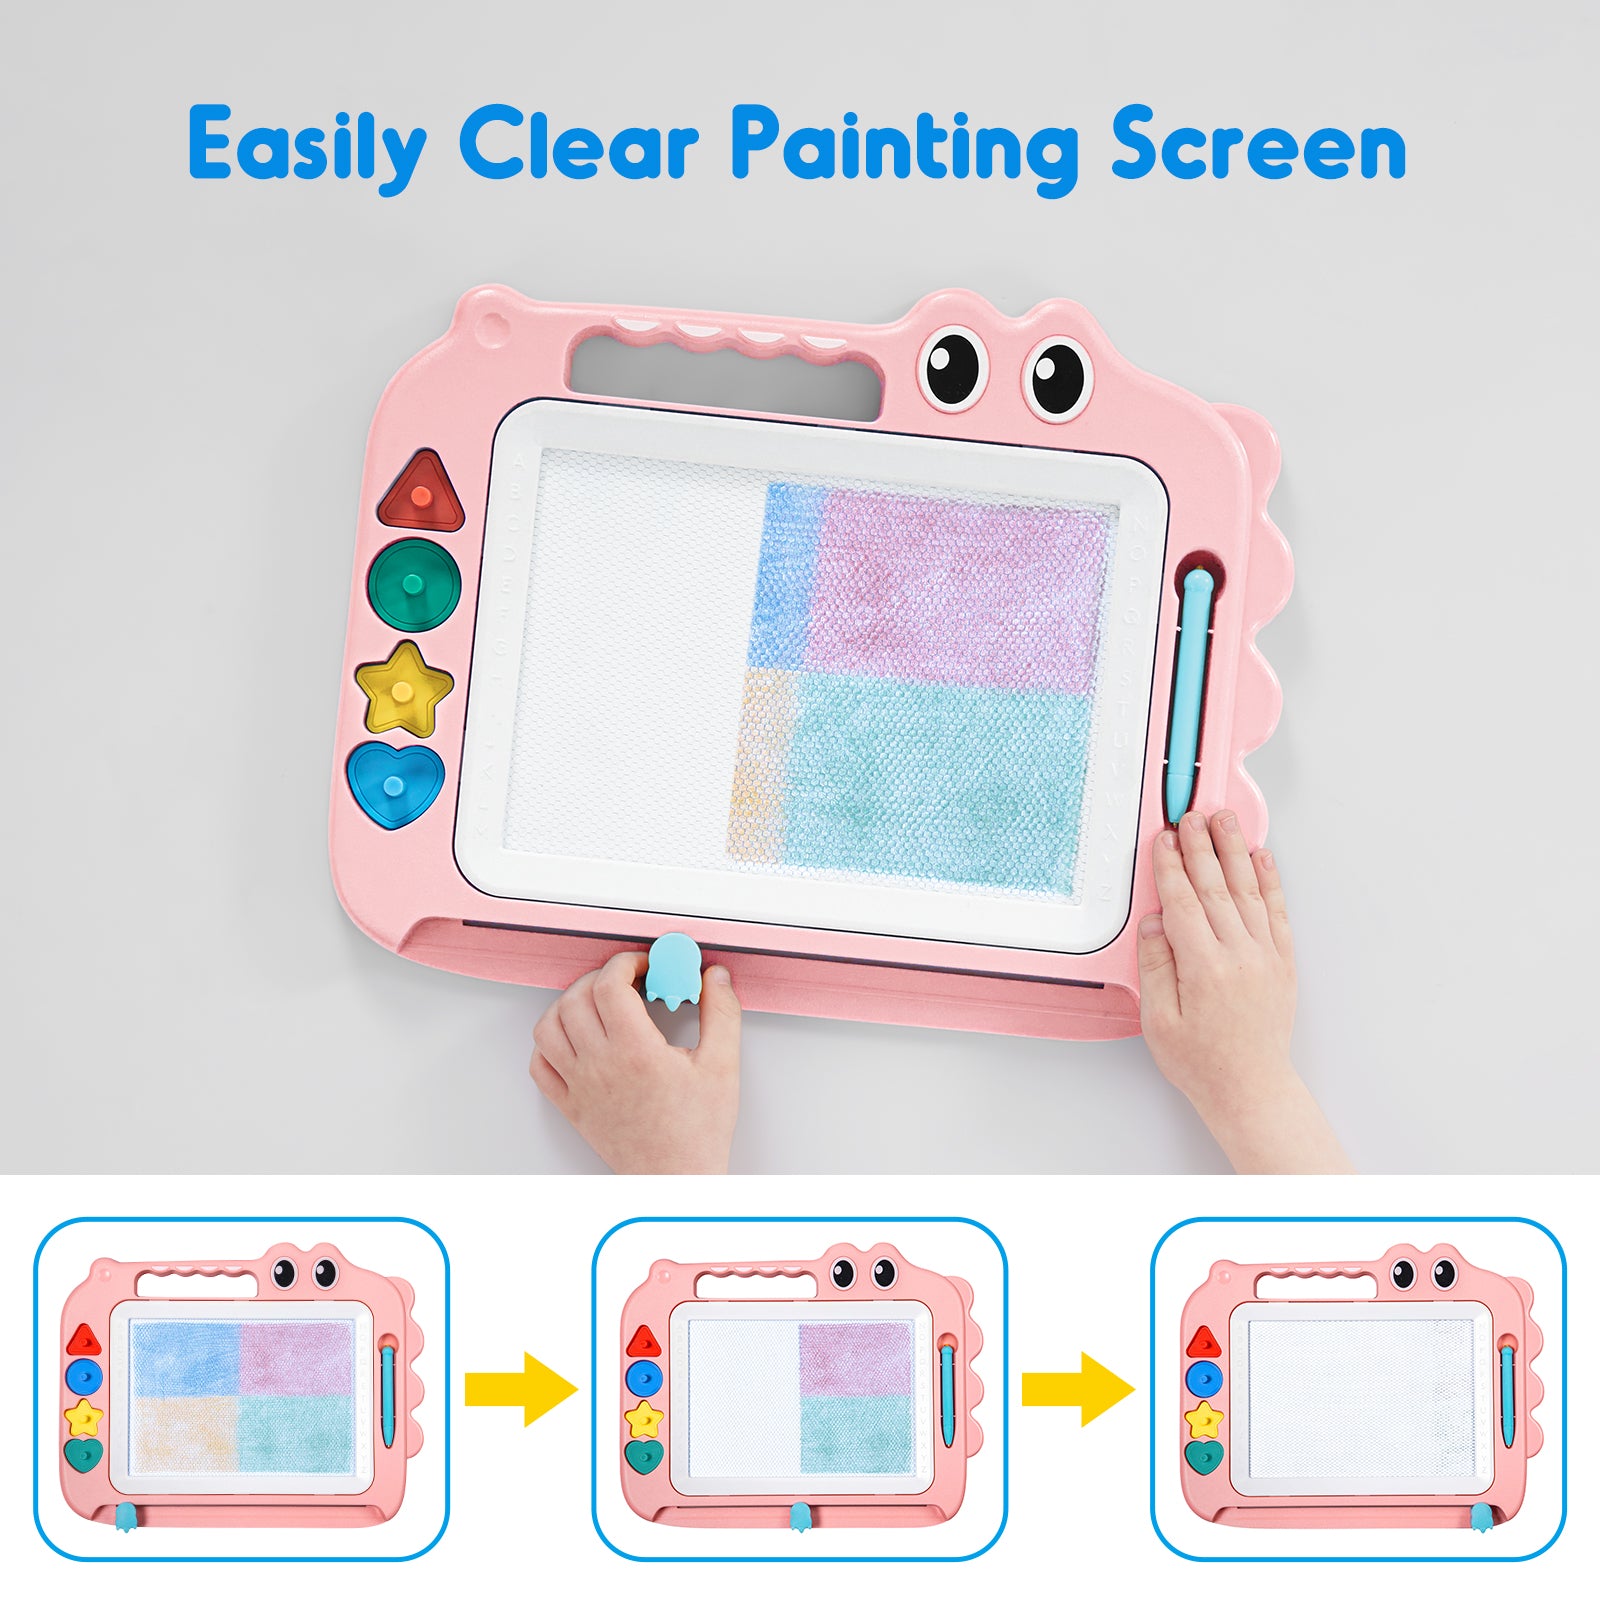 SGILE Magnetic Drawing Board Toy for Kids, Blue - Large for sale